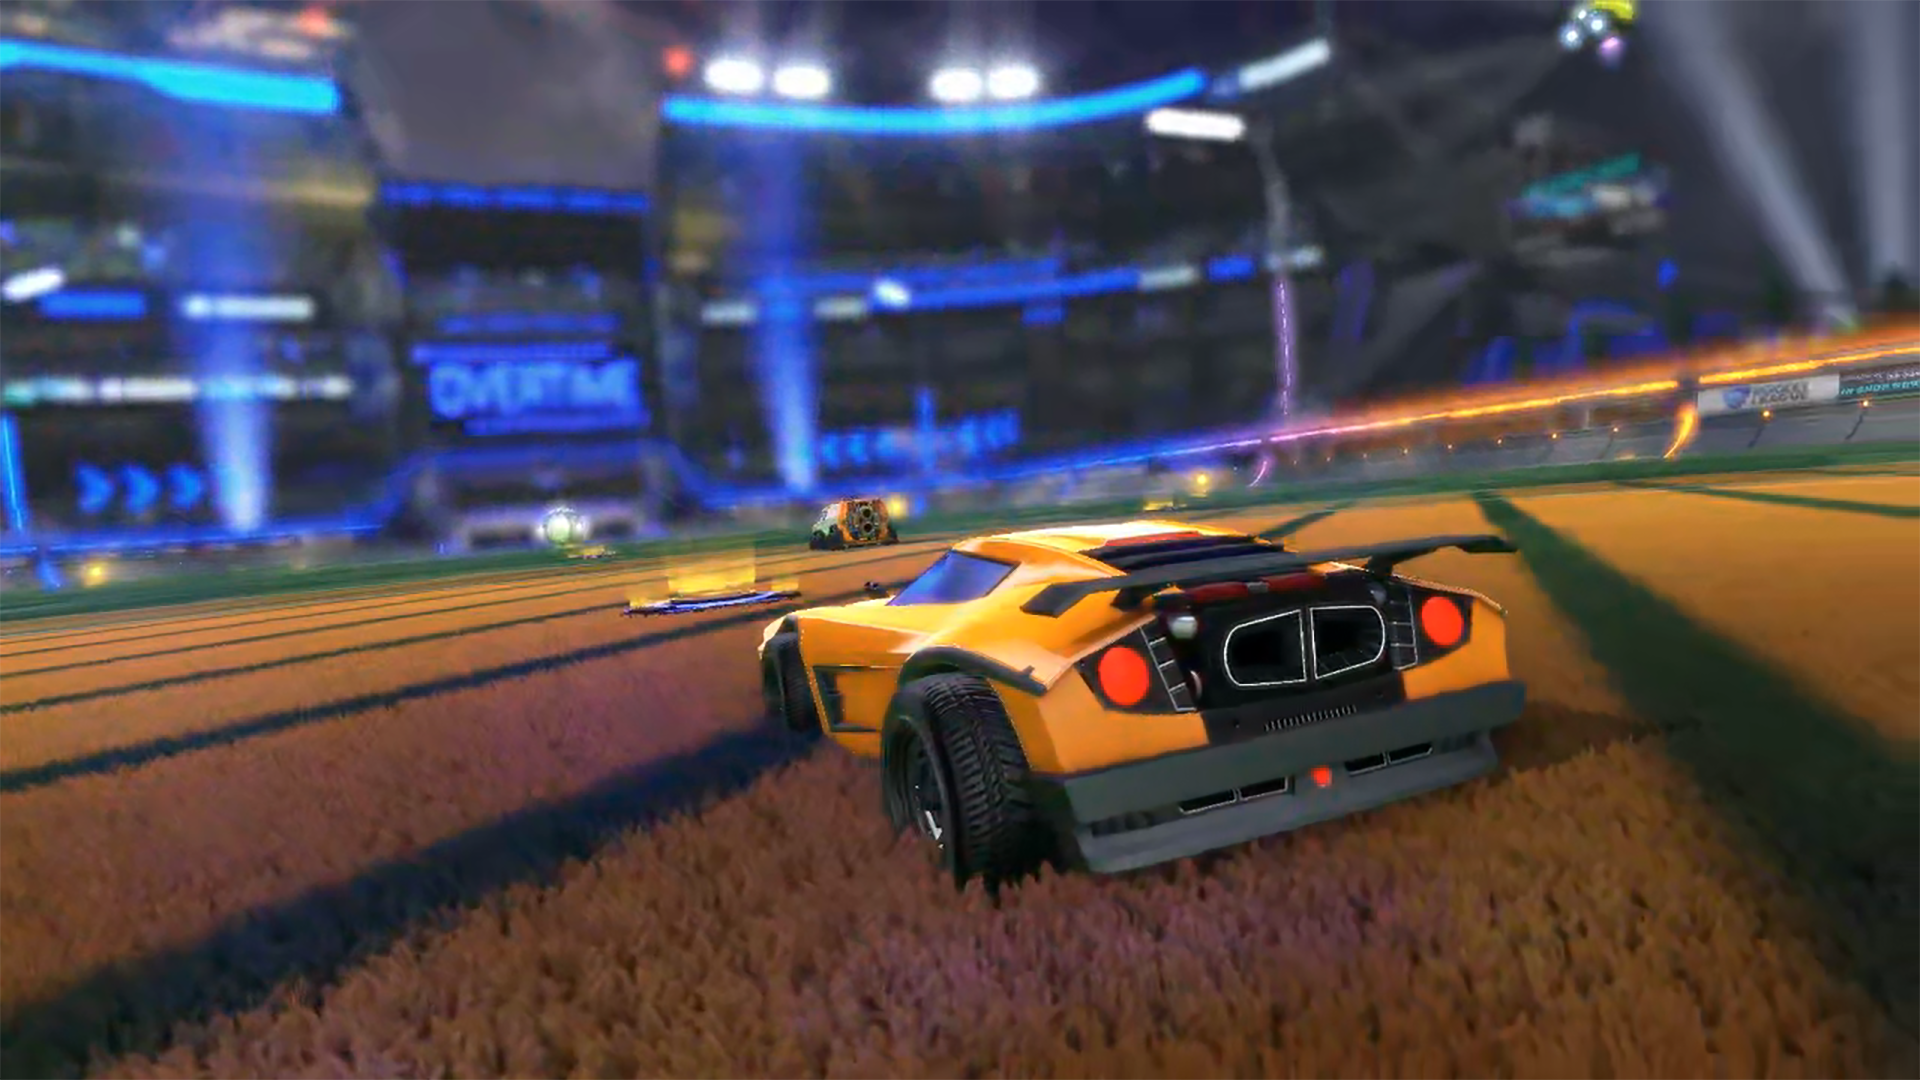 an image of "Rocket League" gameplay with NVIDIA GeForce Now Ultimate cloud gaming.